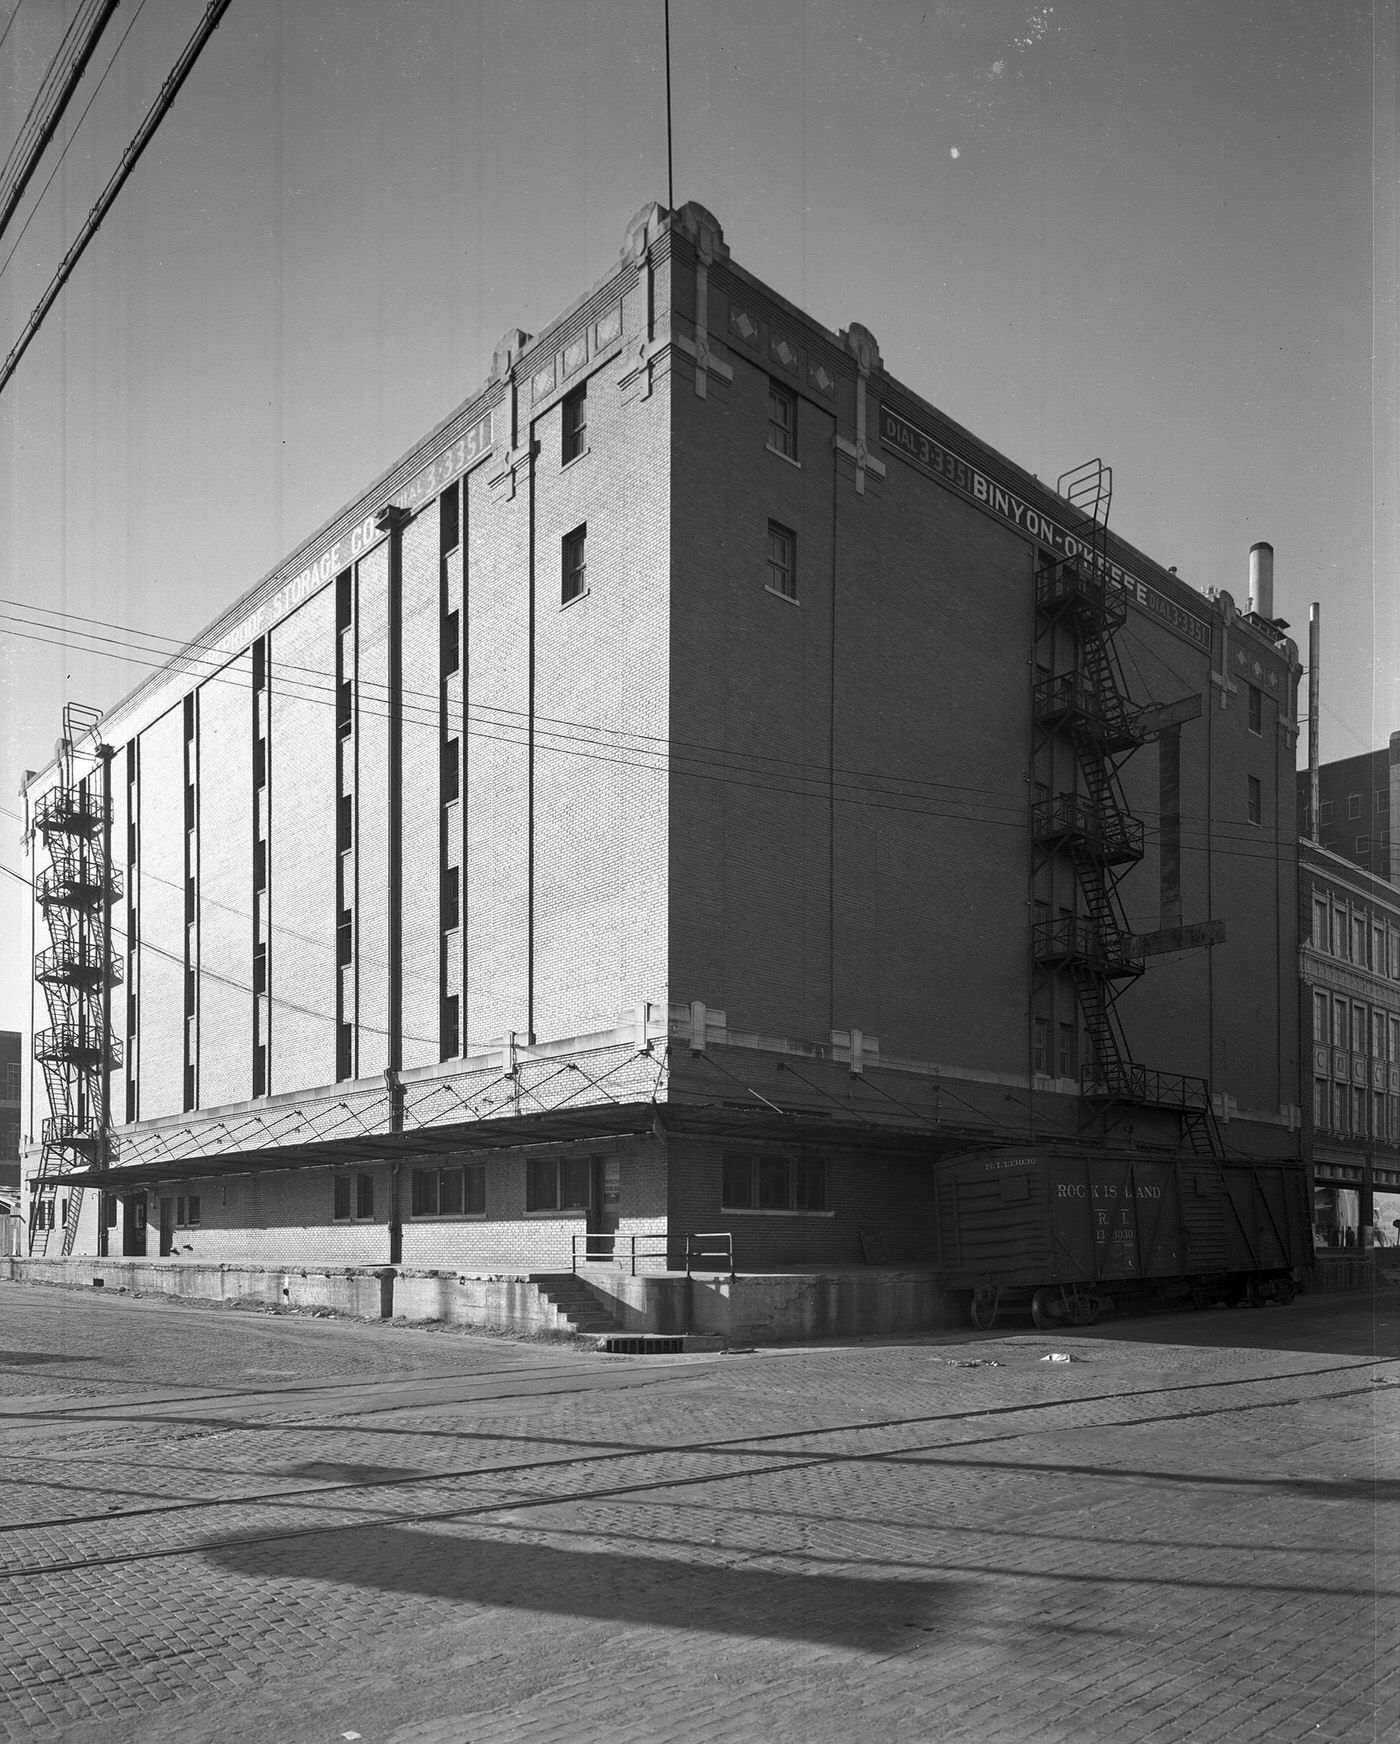 The exterior of Binyon-O'Keefe Storage Company, Fort Worth, Texas, 1942